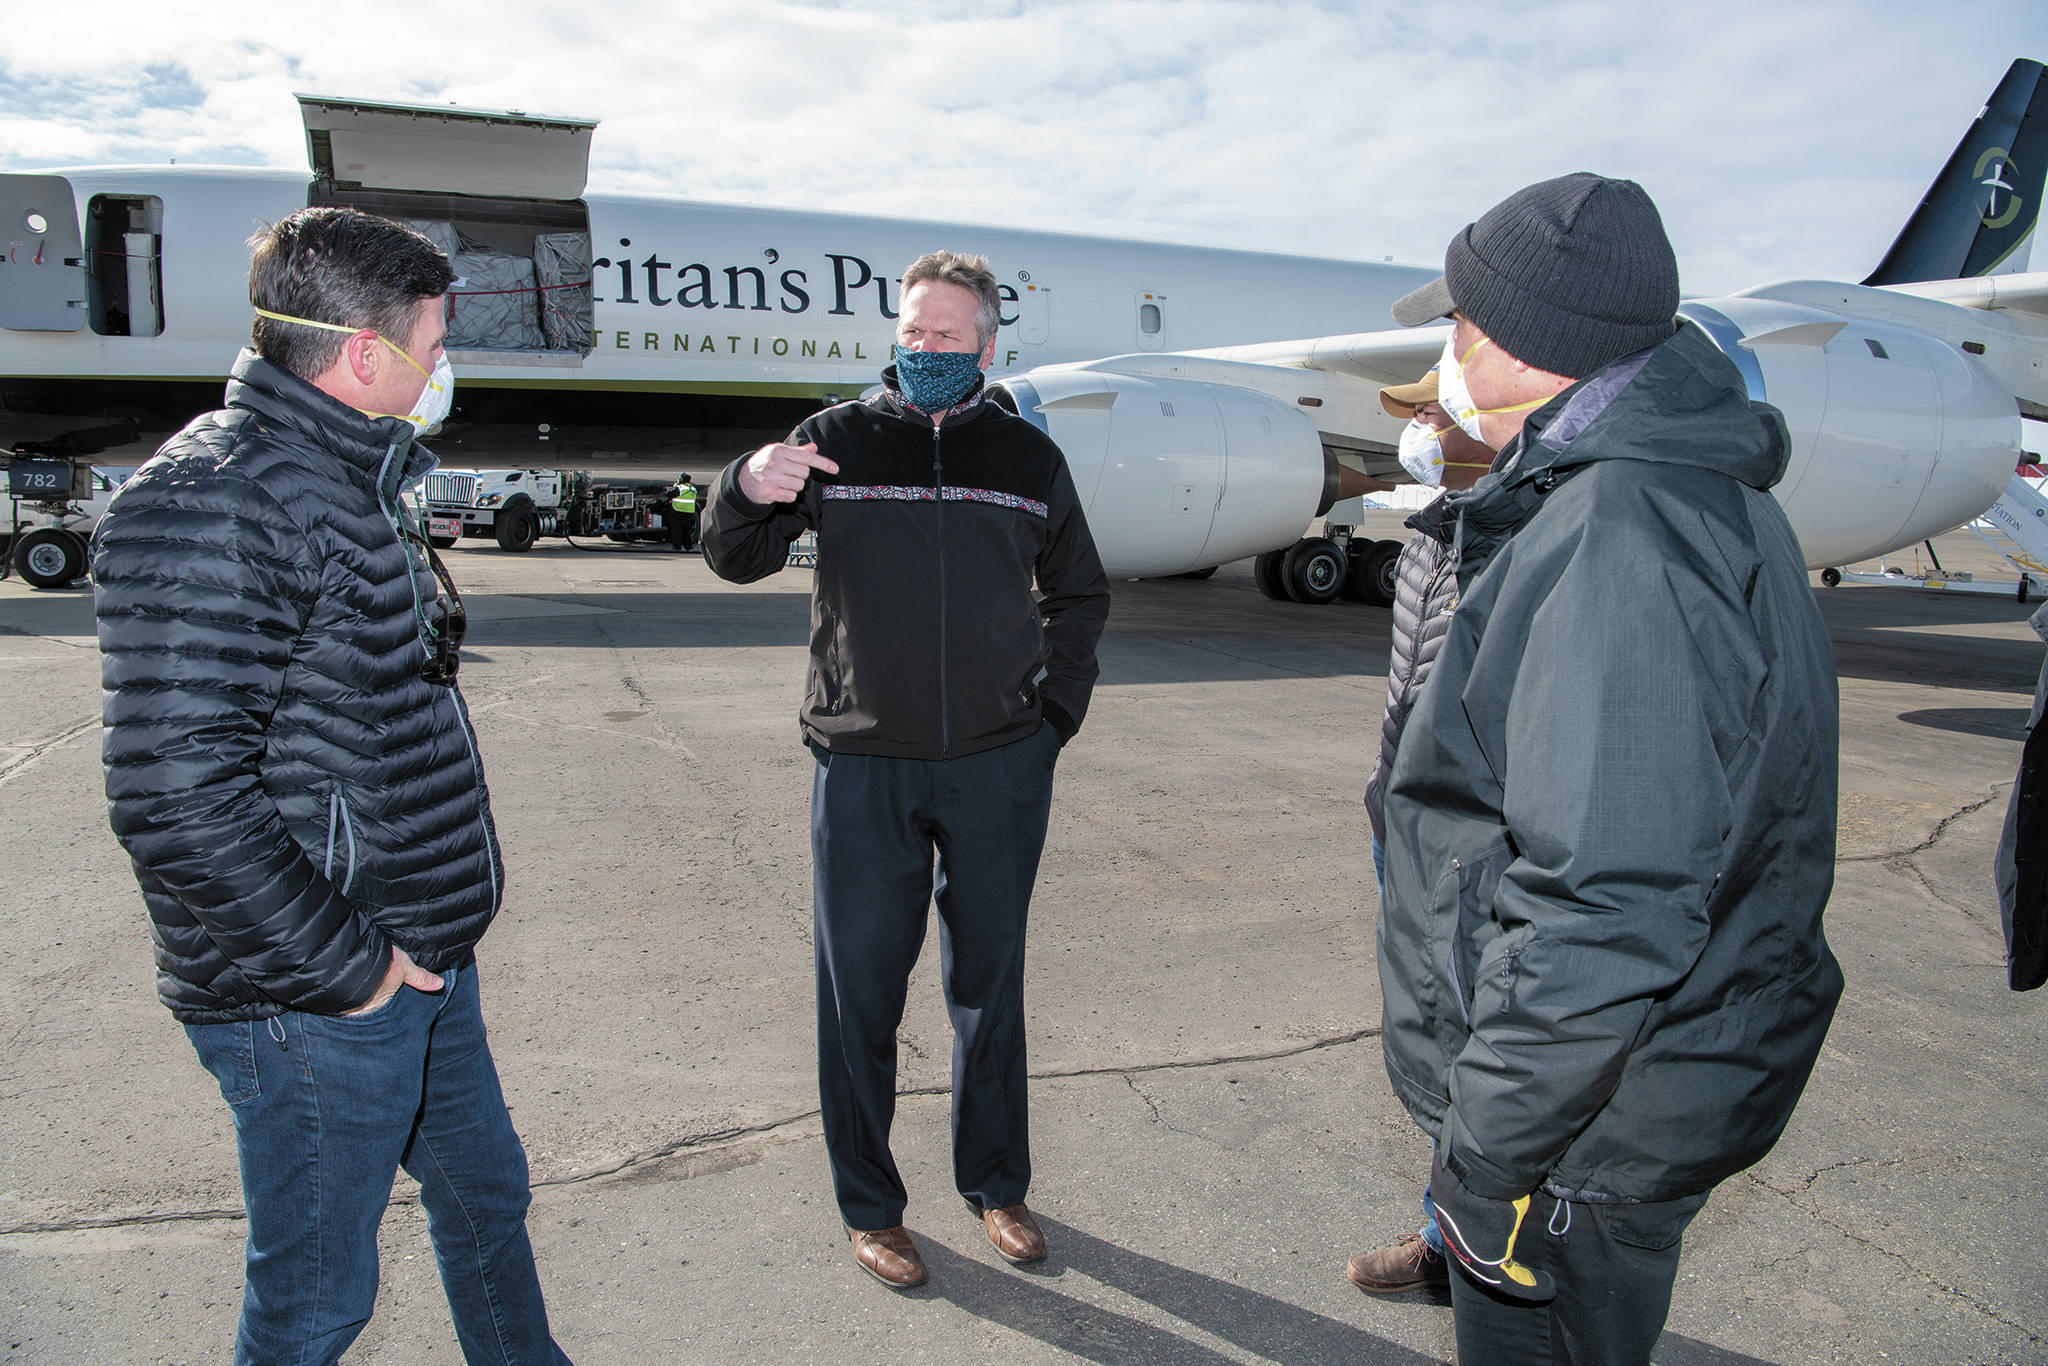 Alaska Gov. Mike Dunleavy (center) speaks with Edward Graham (left) of Samaritan’s Purse, as two other Samaritan’s Purse staff members watch. Dunleavy met the crew and staff of the Samaritan’s Purse DC-8 at Ted Stevens Anchorage International Airport as they offloaded thousands of pounds of medical supplies bound for rural Alaska. (Photo courtesy Office of the Governor)